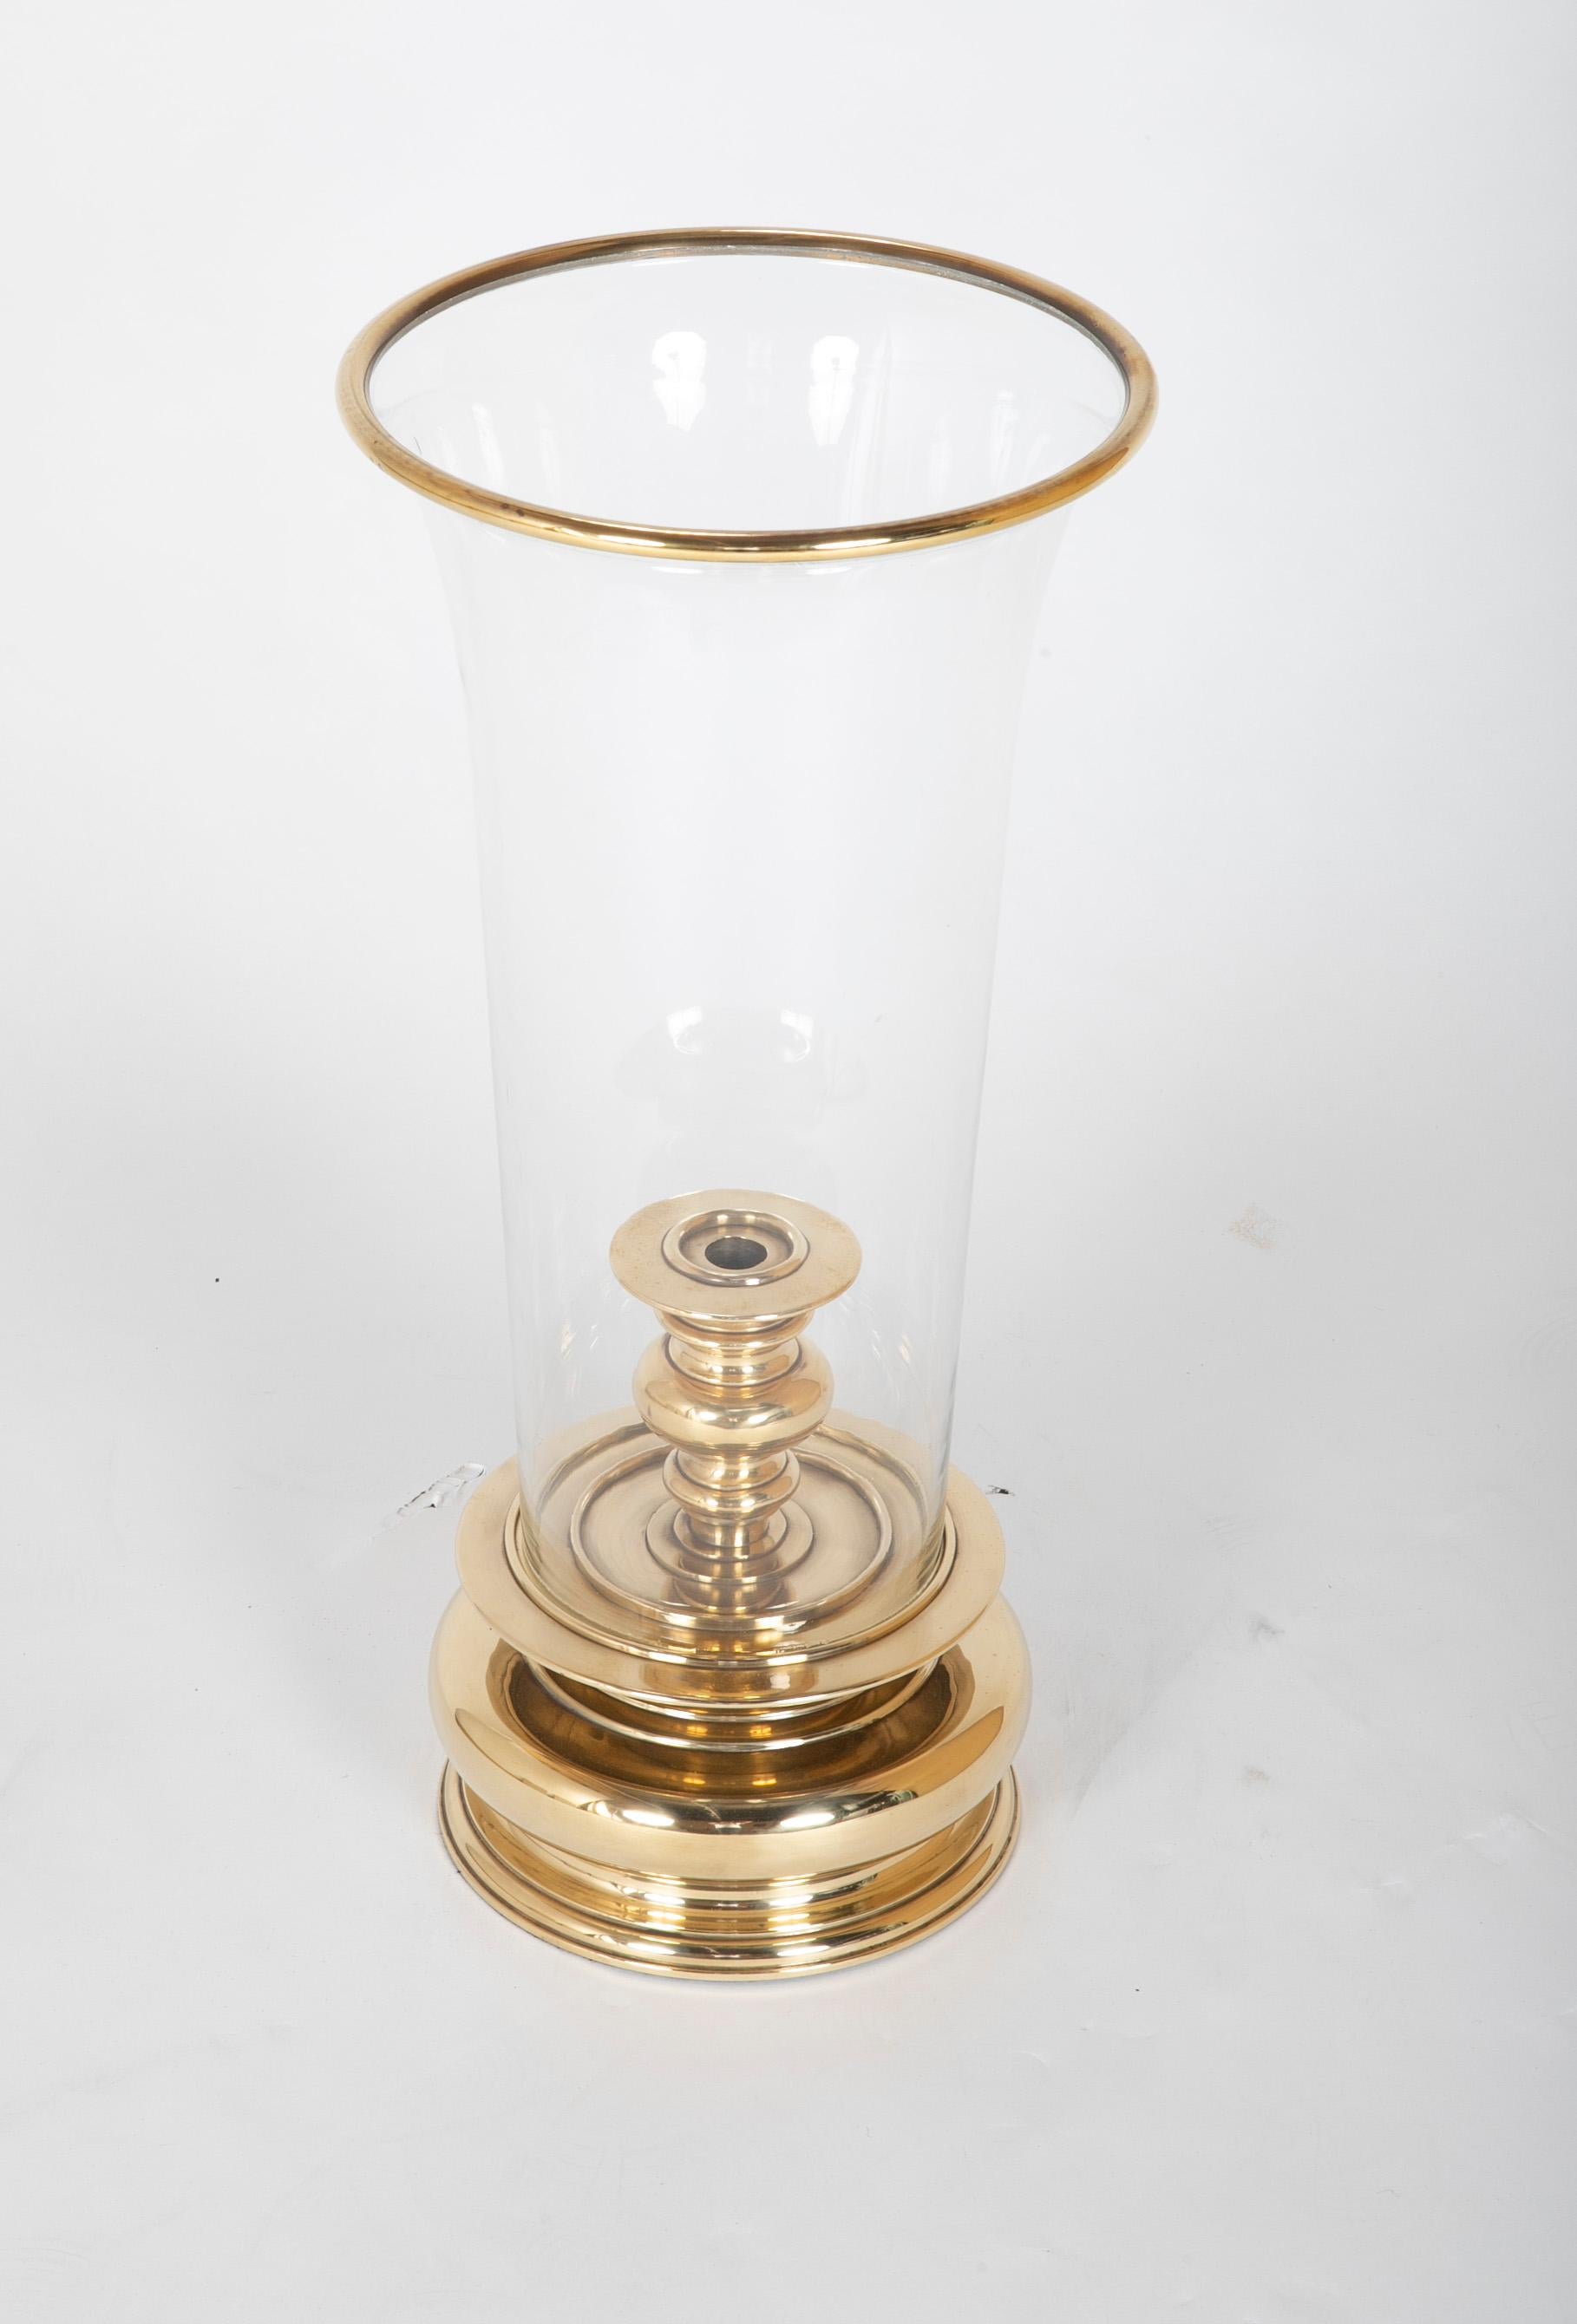 Pair of Monumental Brass Hurricane Lamps by Chapman 1